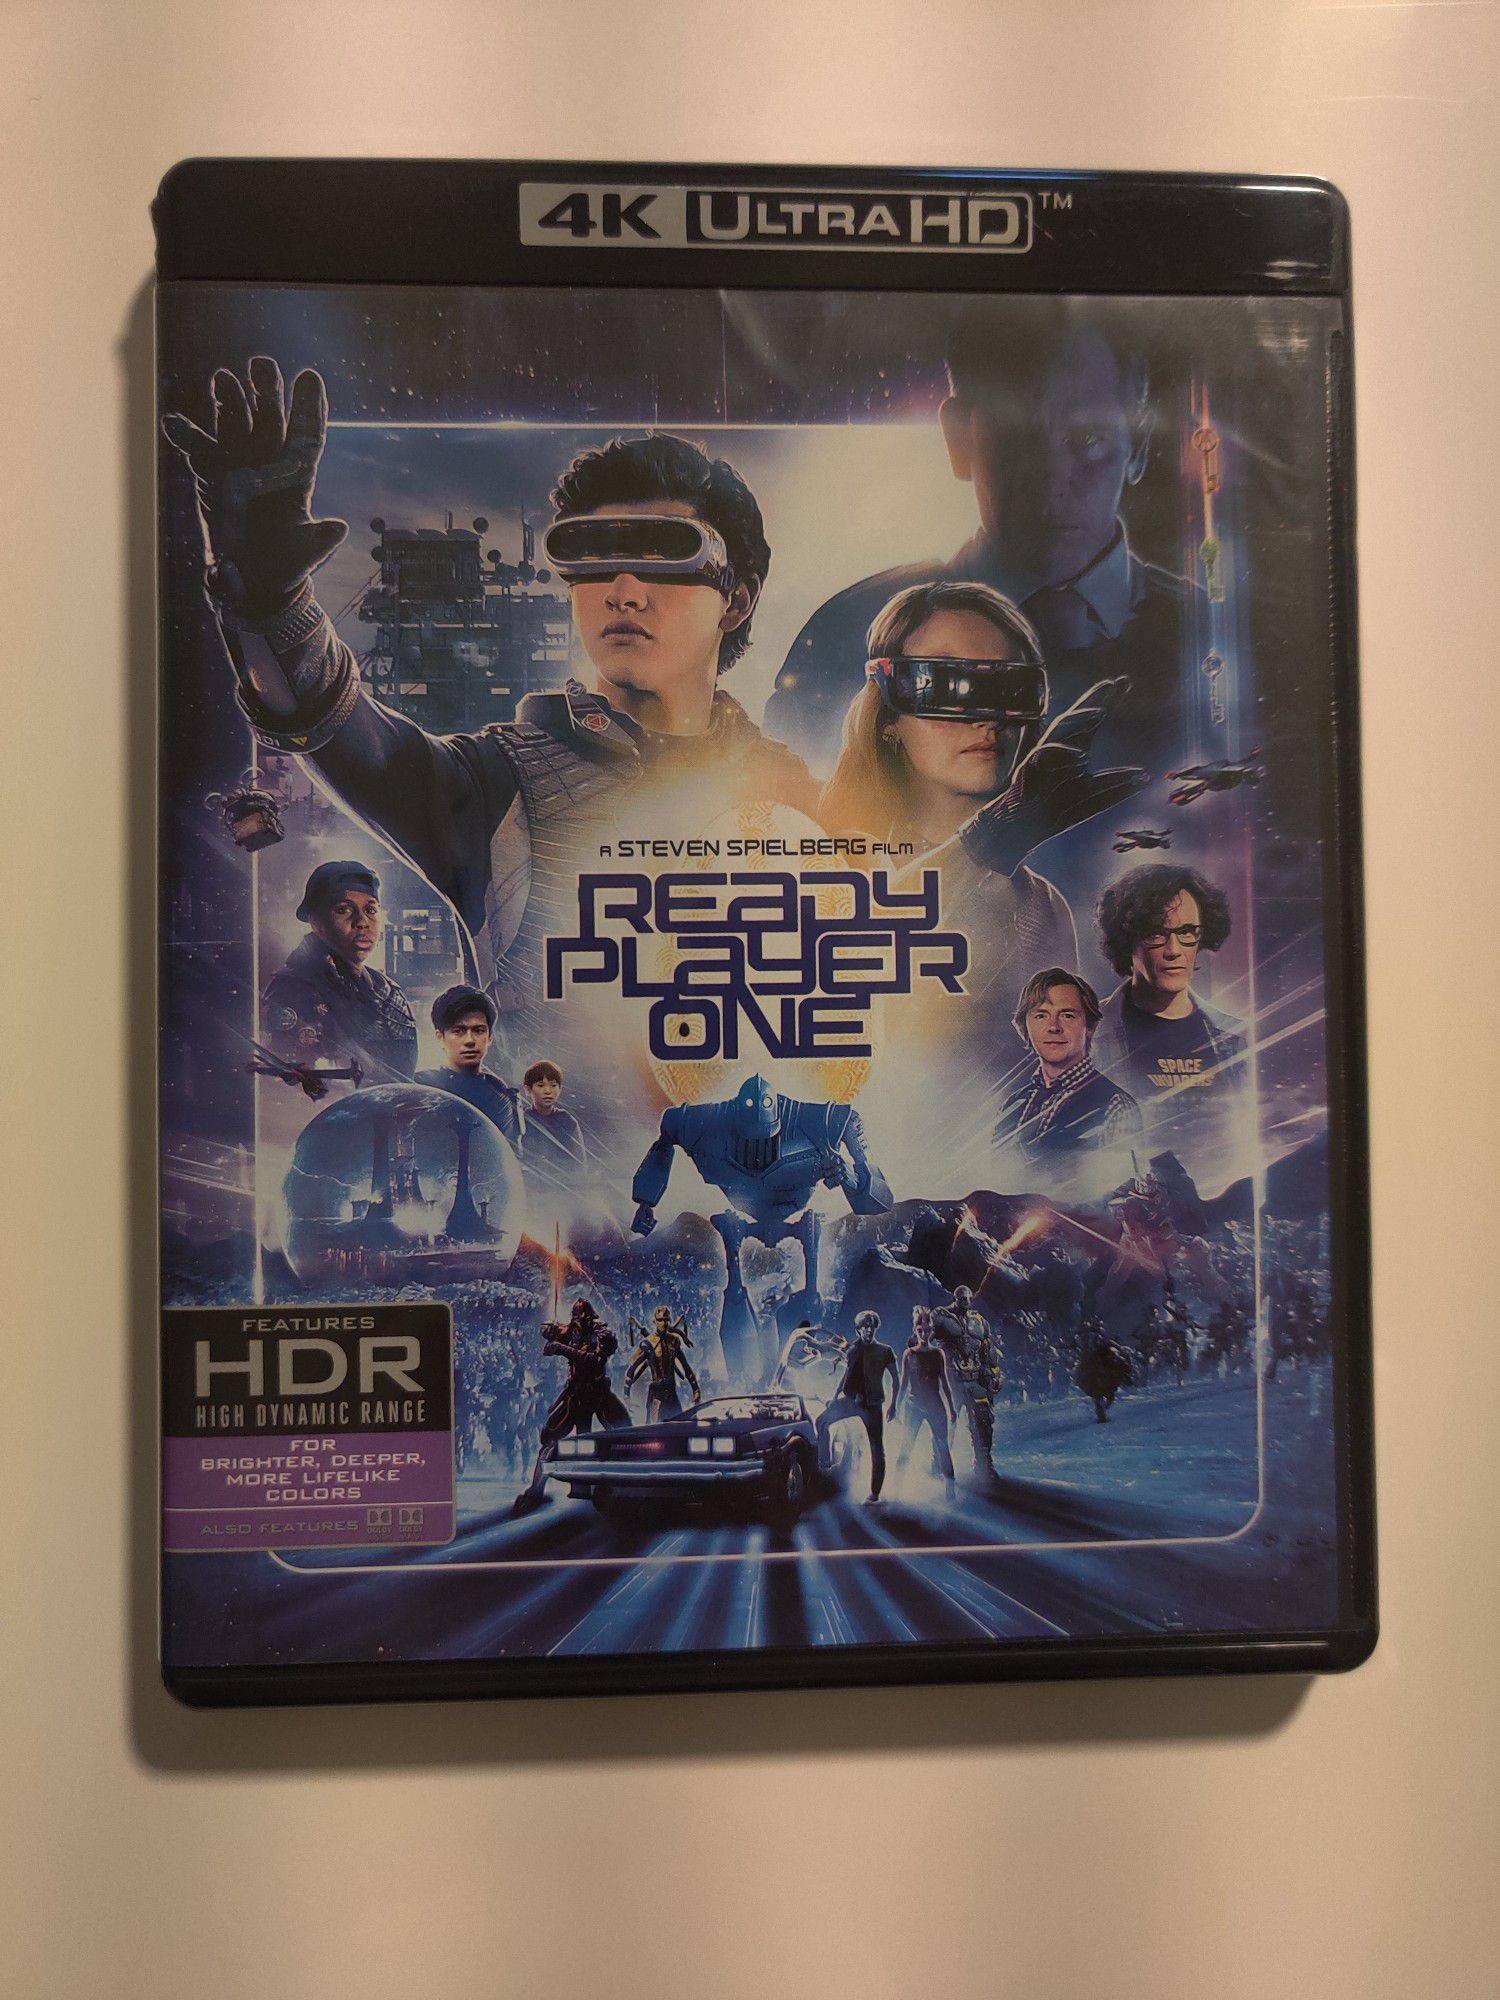 Ready player one 4k blu-ray uhd disc never played no digital